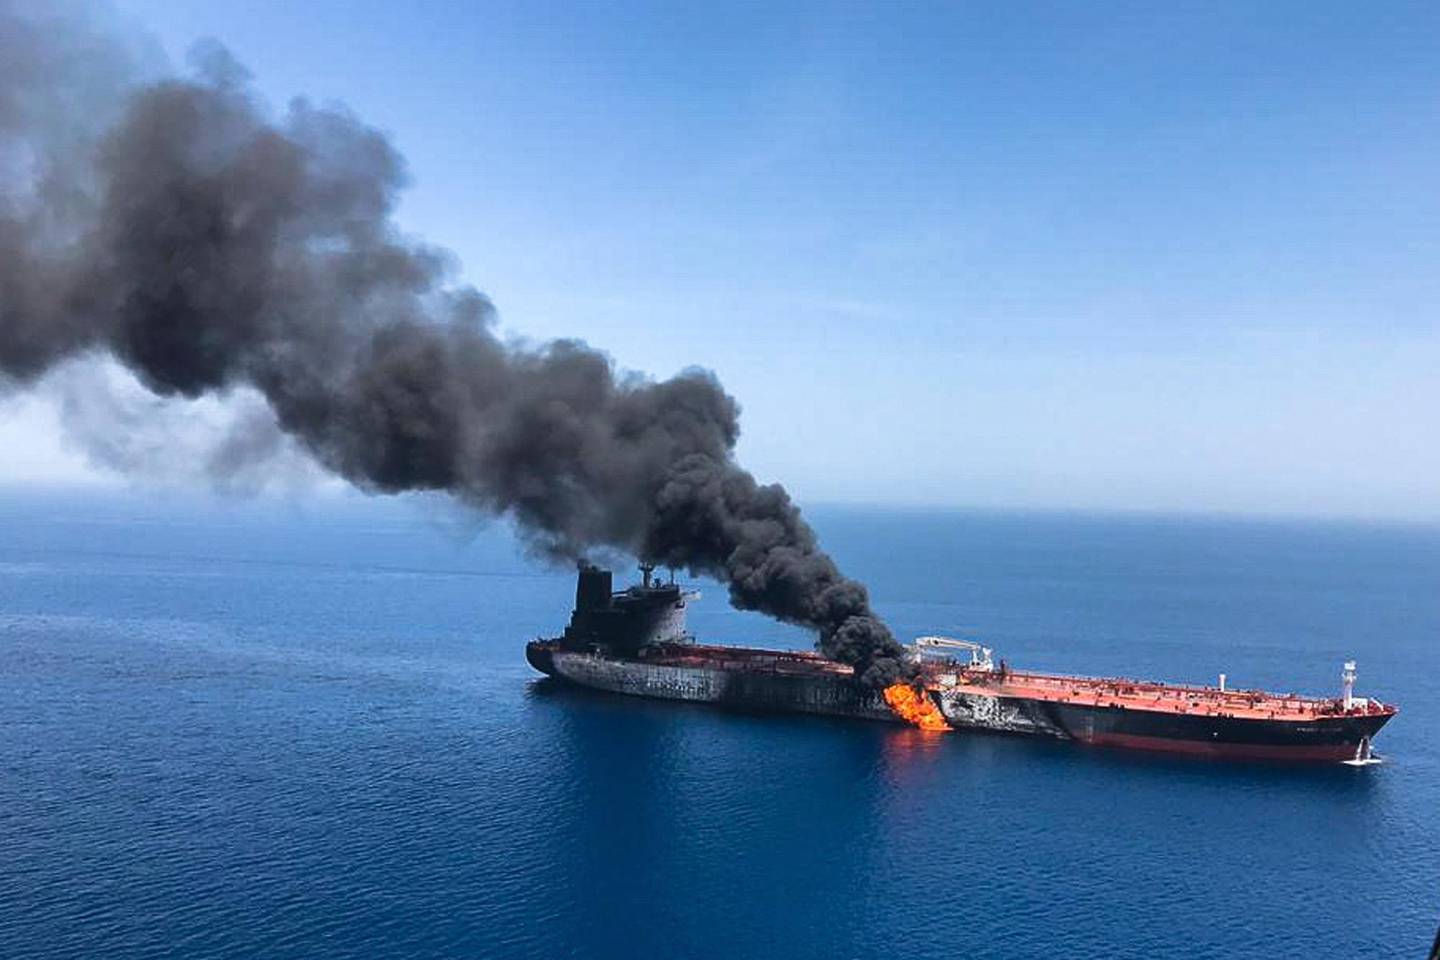 FILE - In this Thursday, June 13, 2019 file photo, an oil tanker is on fire in the sea of Oman. A series of attacks on oil tankers near the Persian Gulf has ratcheted up tensions between the U.S. and Iran -- and raised fears over the safety of one of AsiaÄôs most vital energy trade routes, where about a fifth of the worldÄôs oil passes through its narrowest at the Strait of Hormuz. The attacks have jolted the shipping industry, with many of operators in the region on high alert. (AP Photo/ISNA, File)